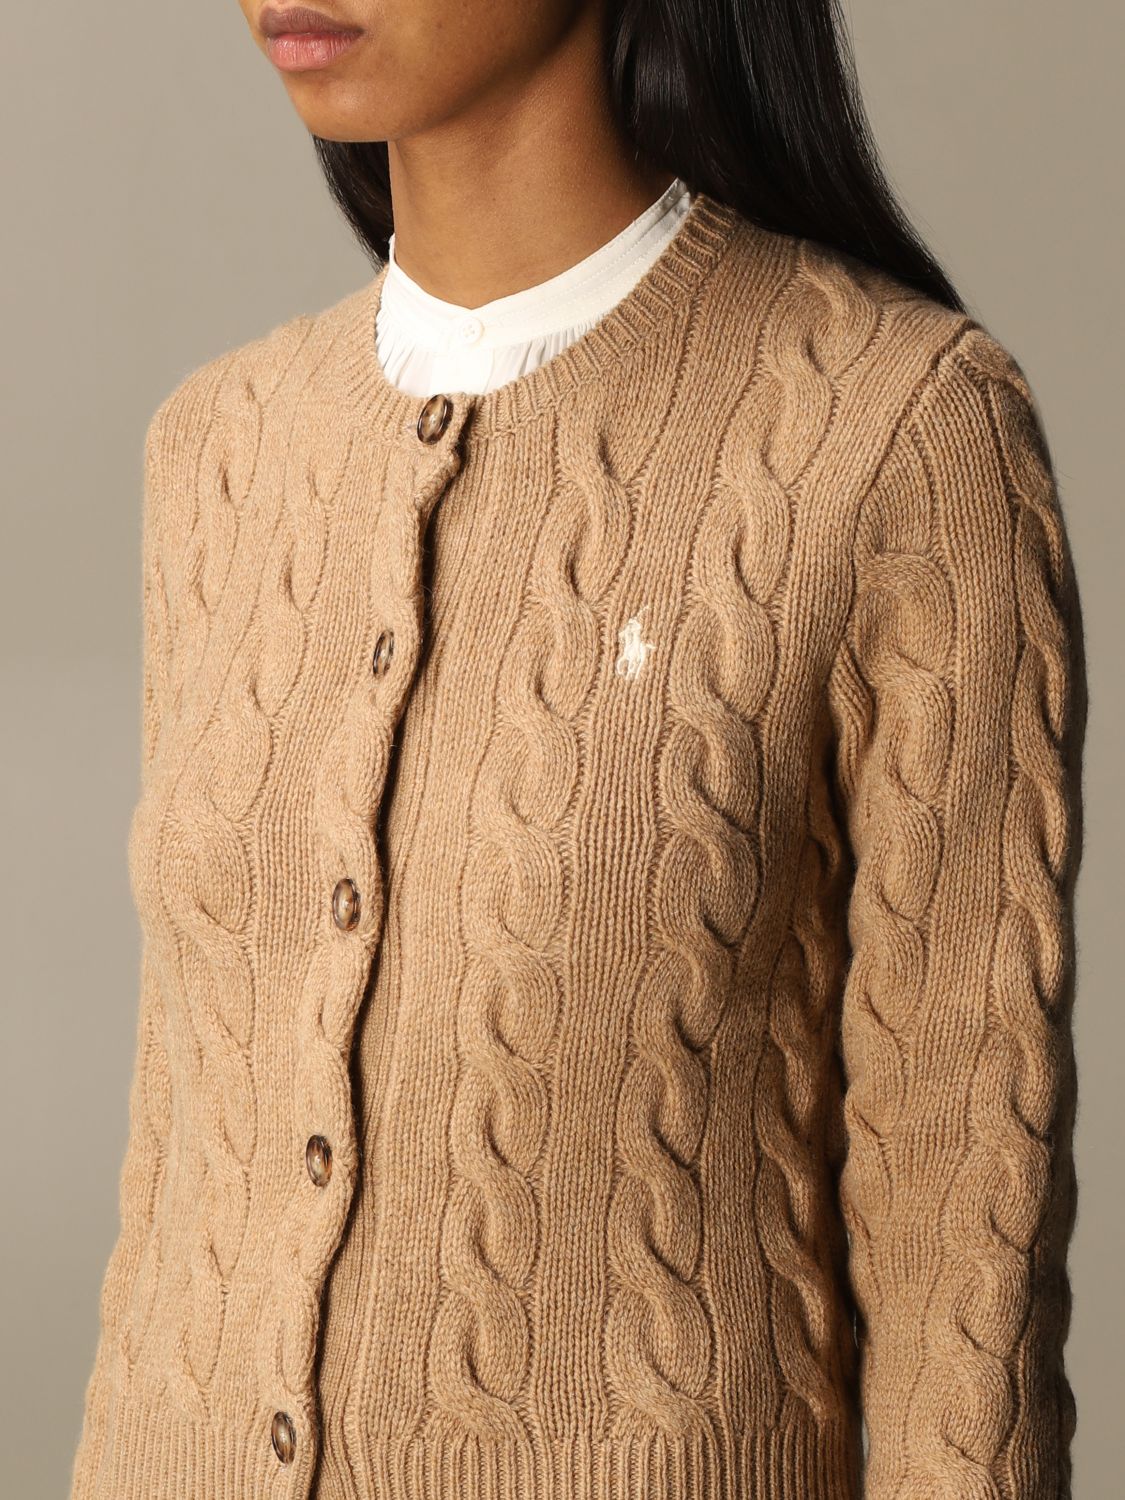 POLO RALPH LAUREN: cable cardigan in wool and cashmere - Camel | Polo Ralph  Lauren sweater 211801493 online on 